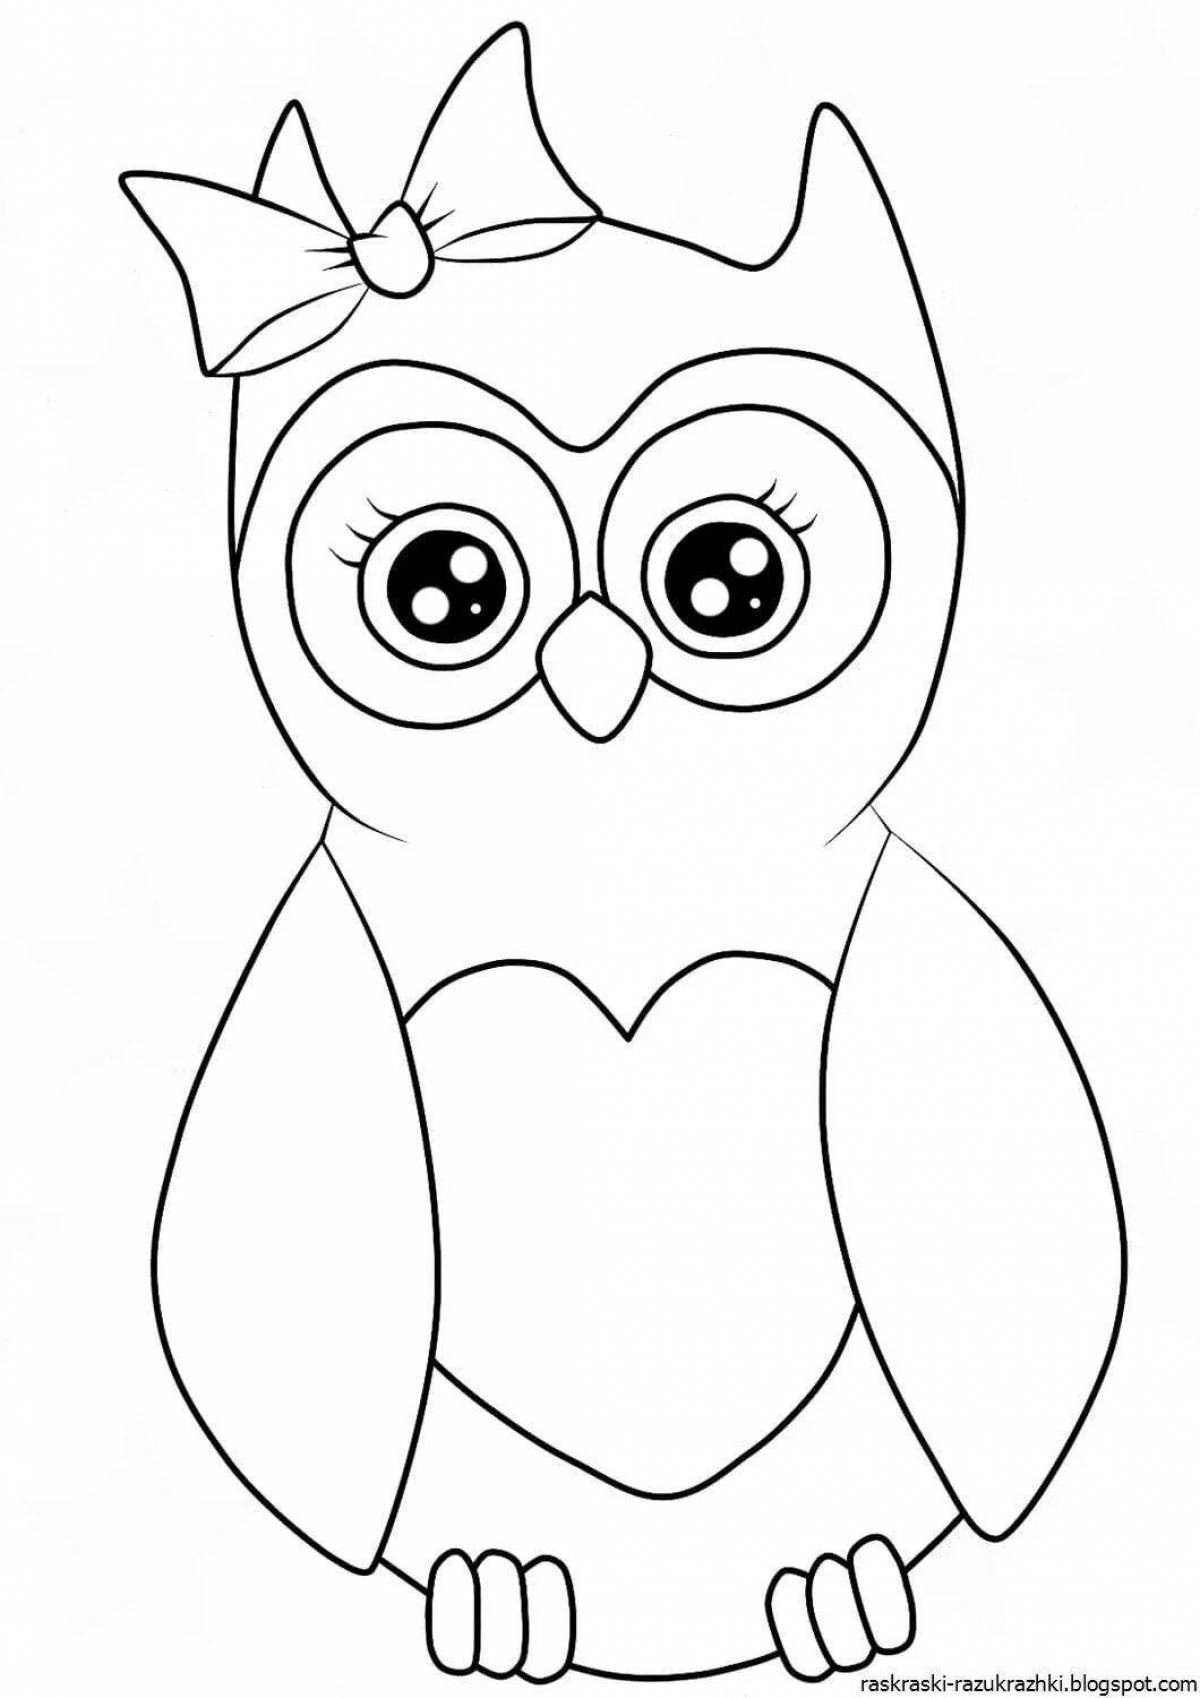 Serene coloring drawing of an owl